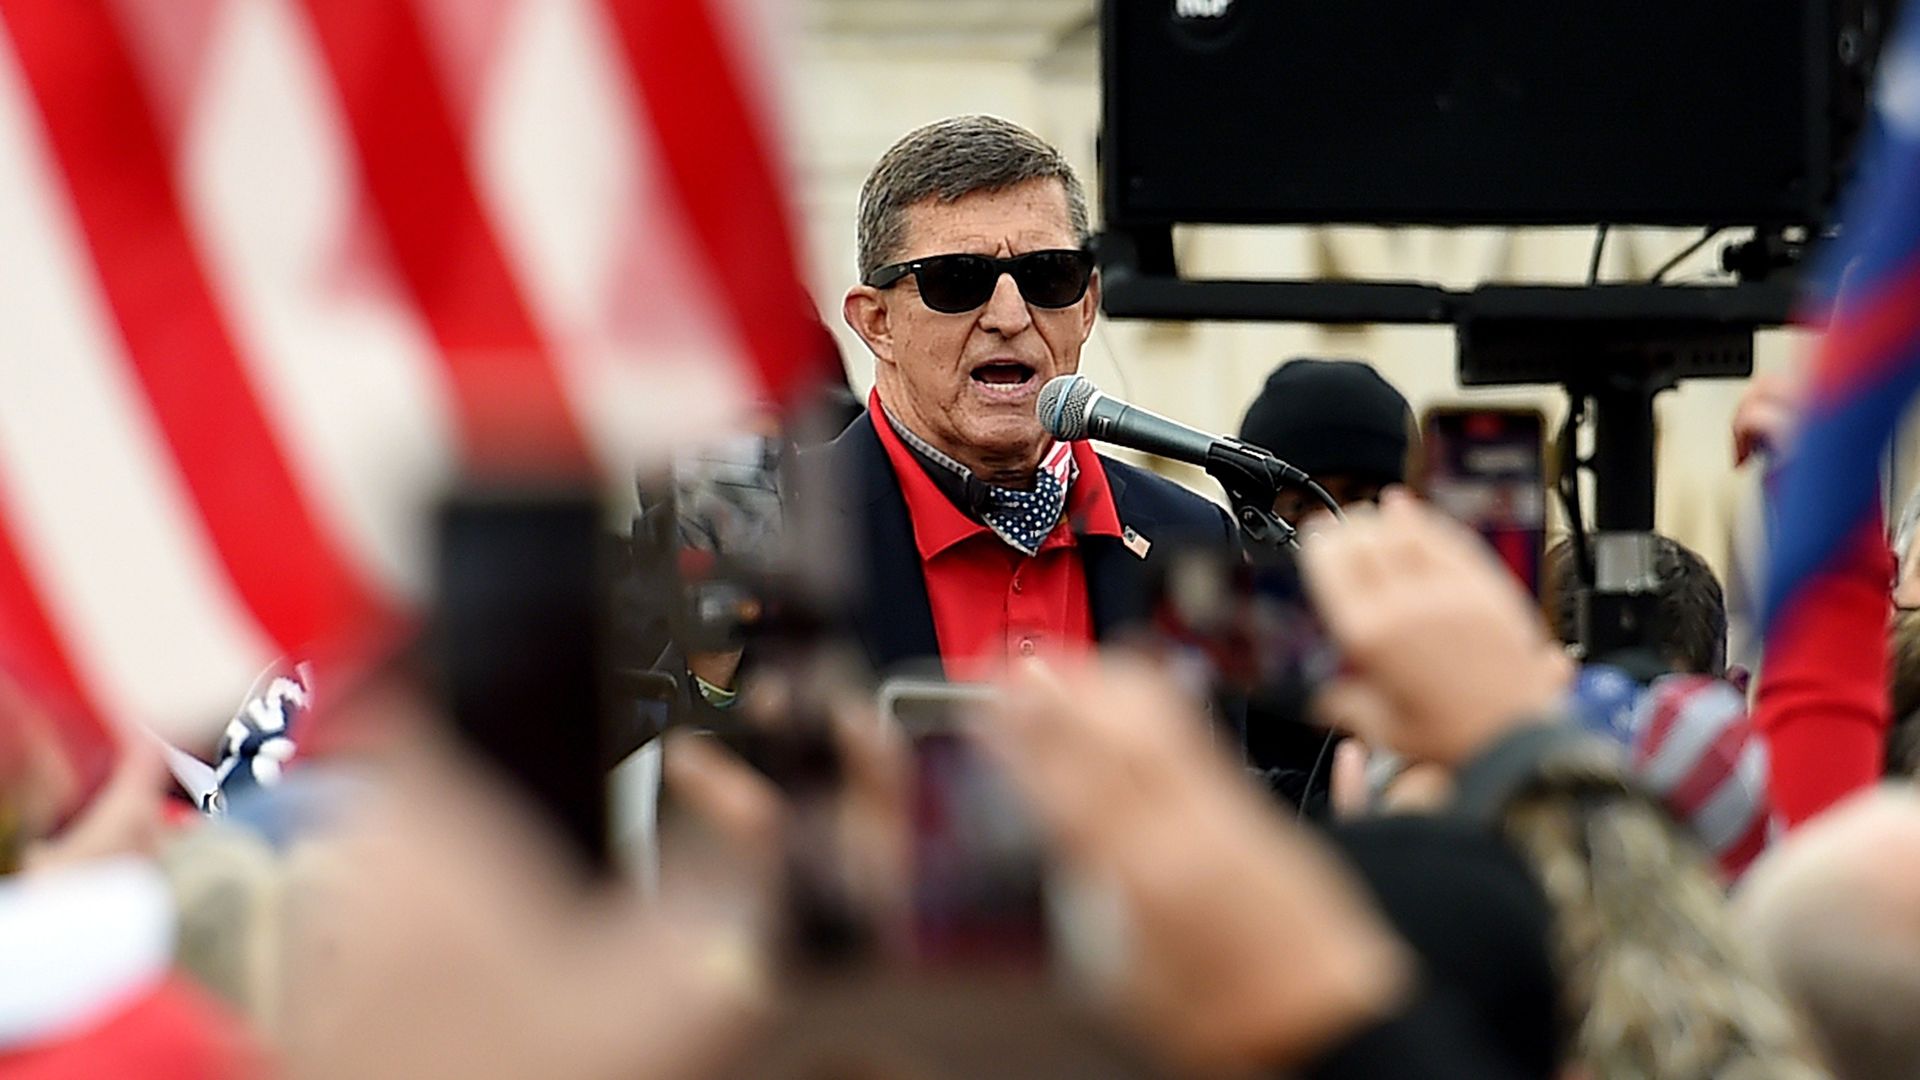 Michael Flynn wears sunglasses and stands in front of a crowd